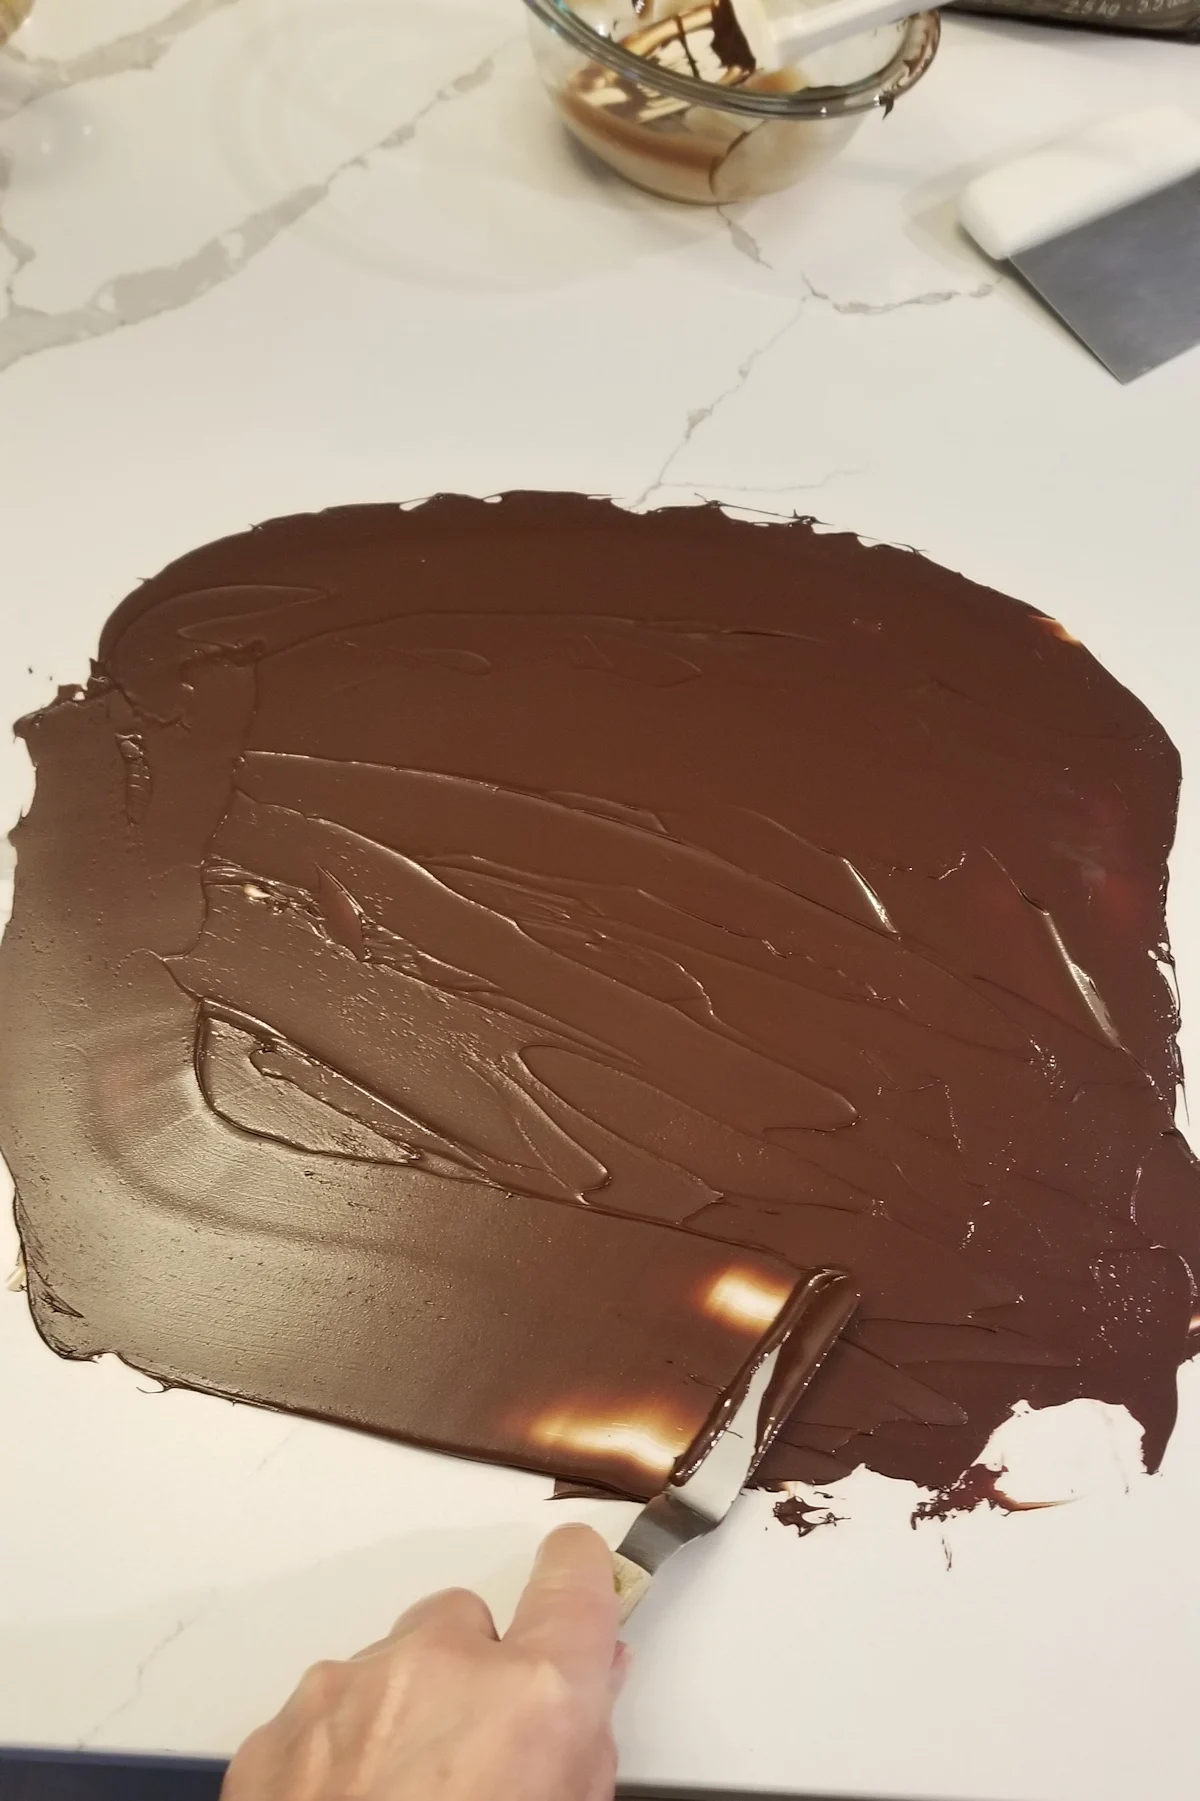 spreading chocolate into a thin layer on a work surface